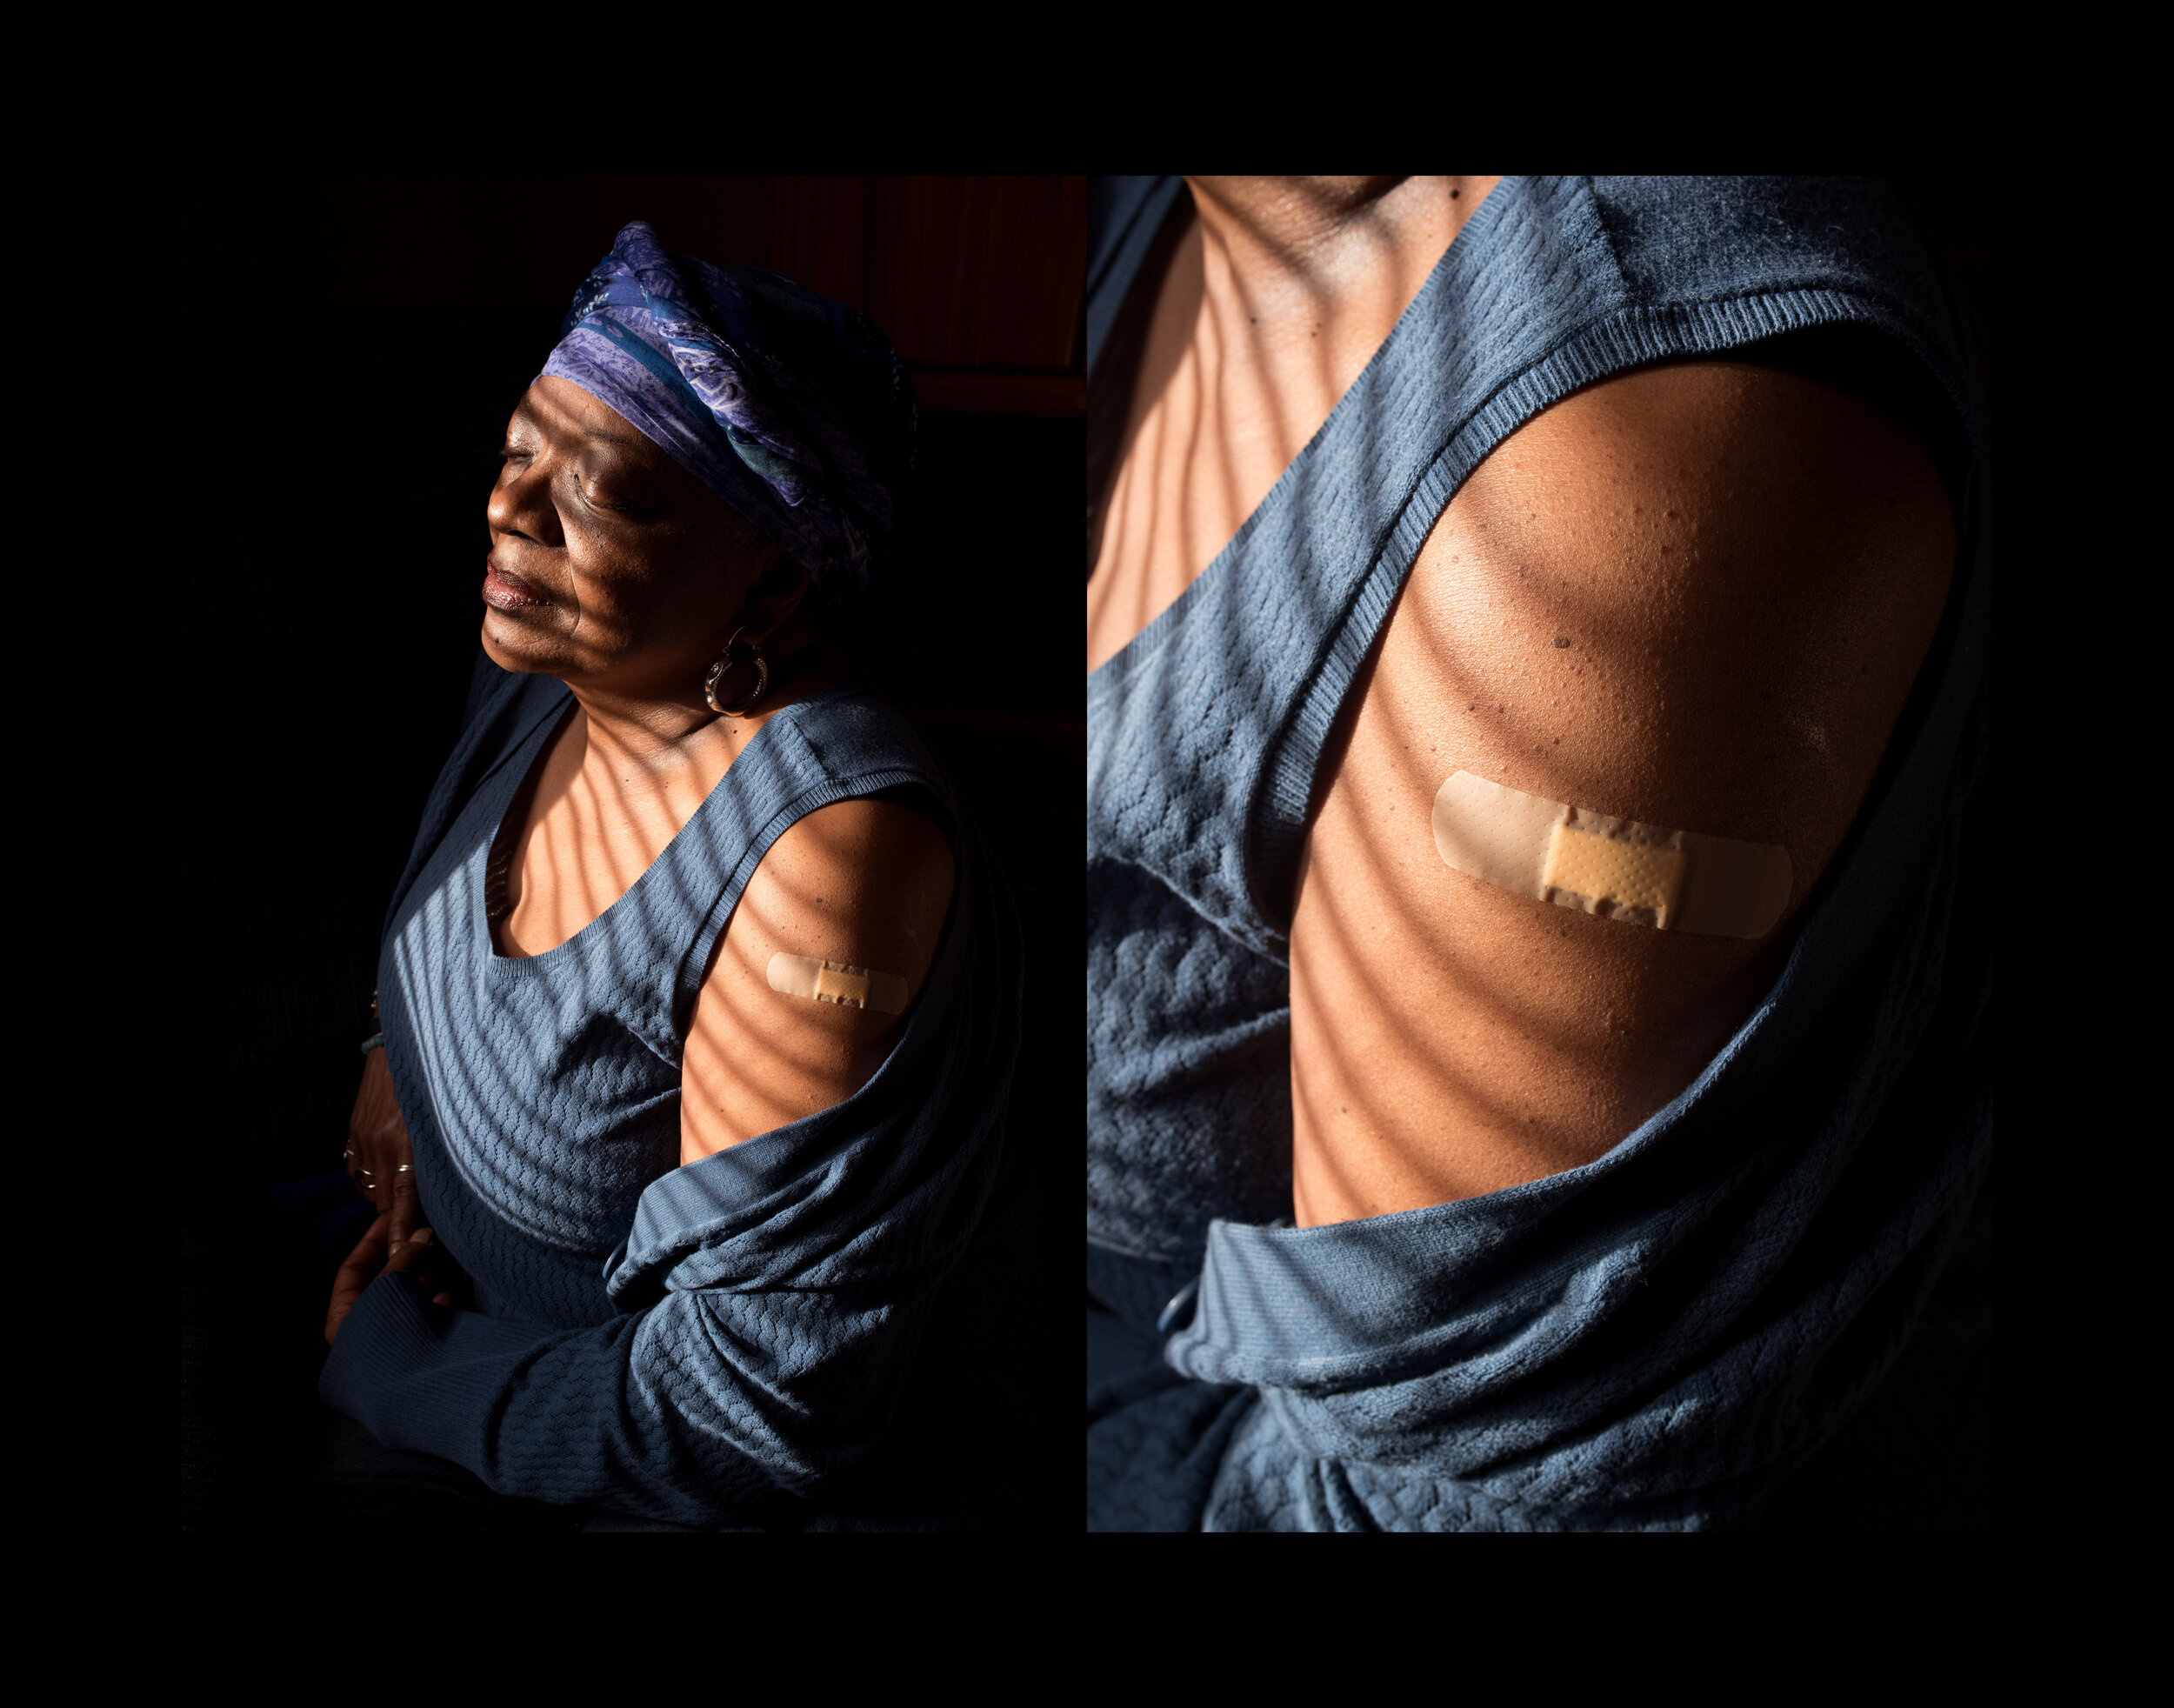   My mother, Michelle Nunn-Thomas received her first dose of the COVID vaccine. She said, "Thank God" while proudly showing off the band-aid on the arm where she received the injection while at our home in Southfield, MI on Friday, March 12, 2021.  